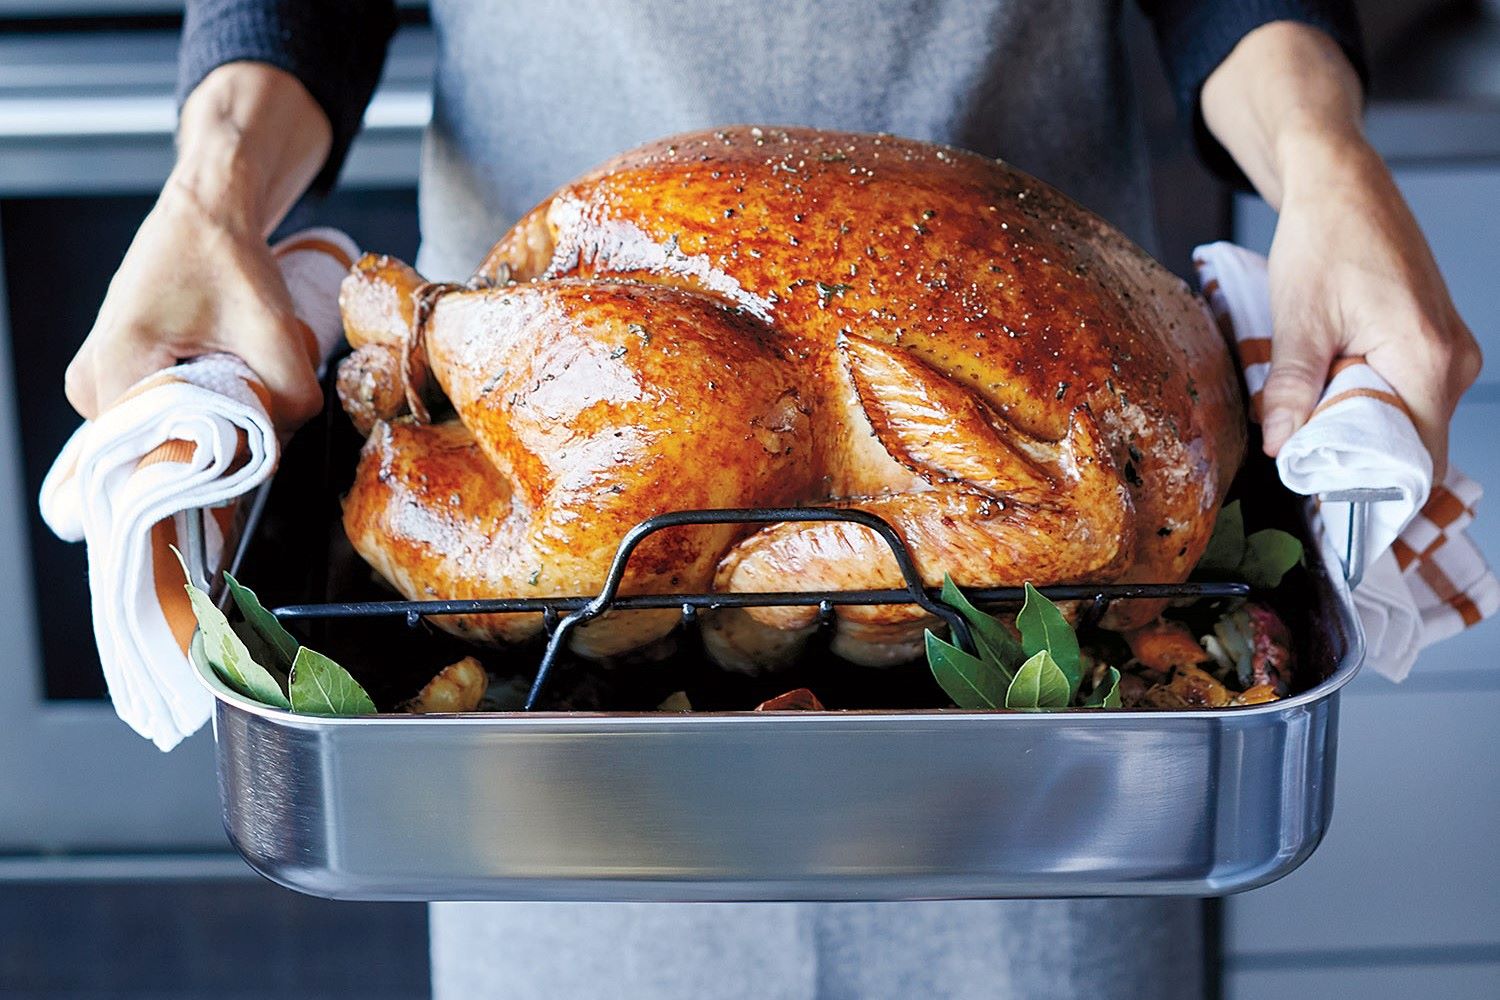 How long should I cook my turkey?